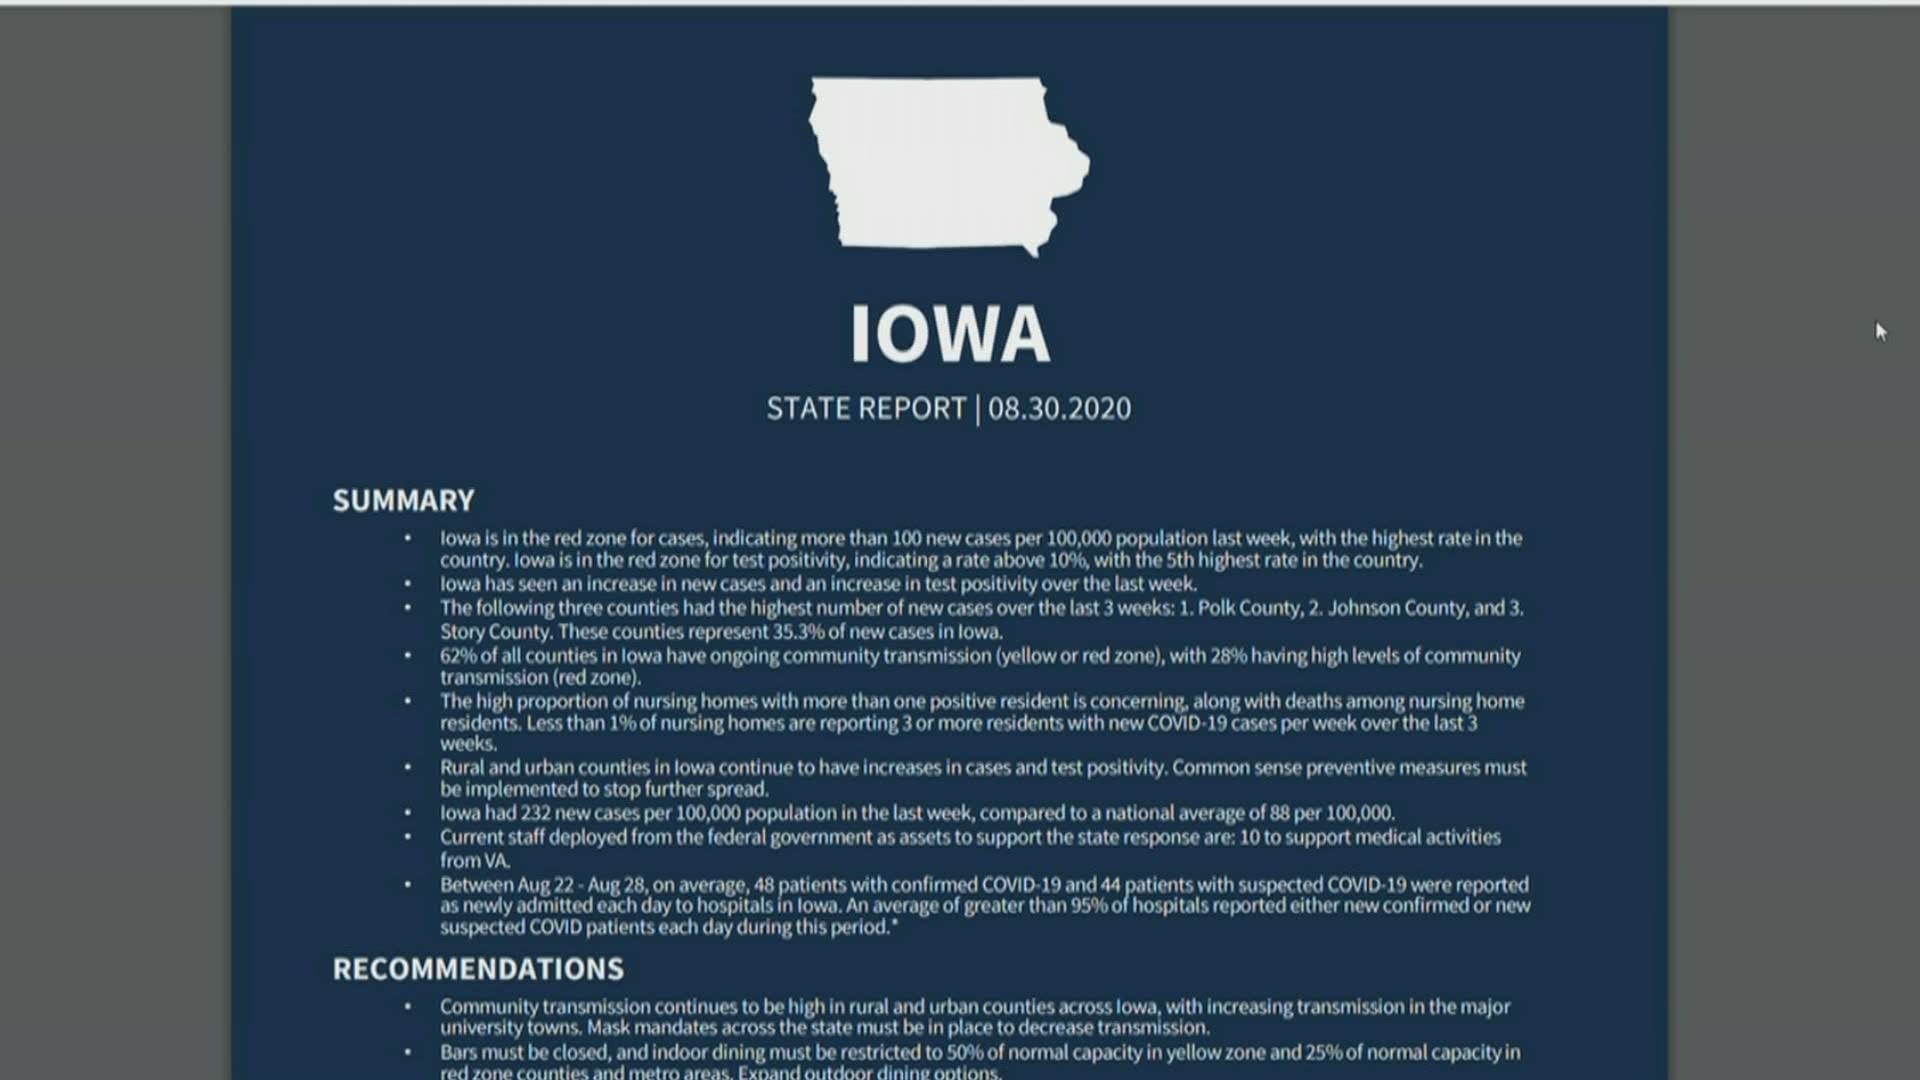 The report says Iowa's positivity rate sat above 10% from Aug. 20 to Aug. 26, making it the fifth highest rate in the country.